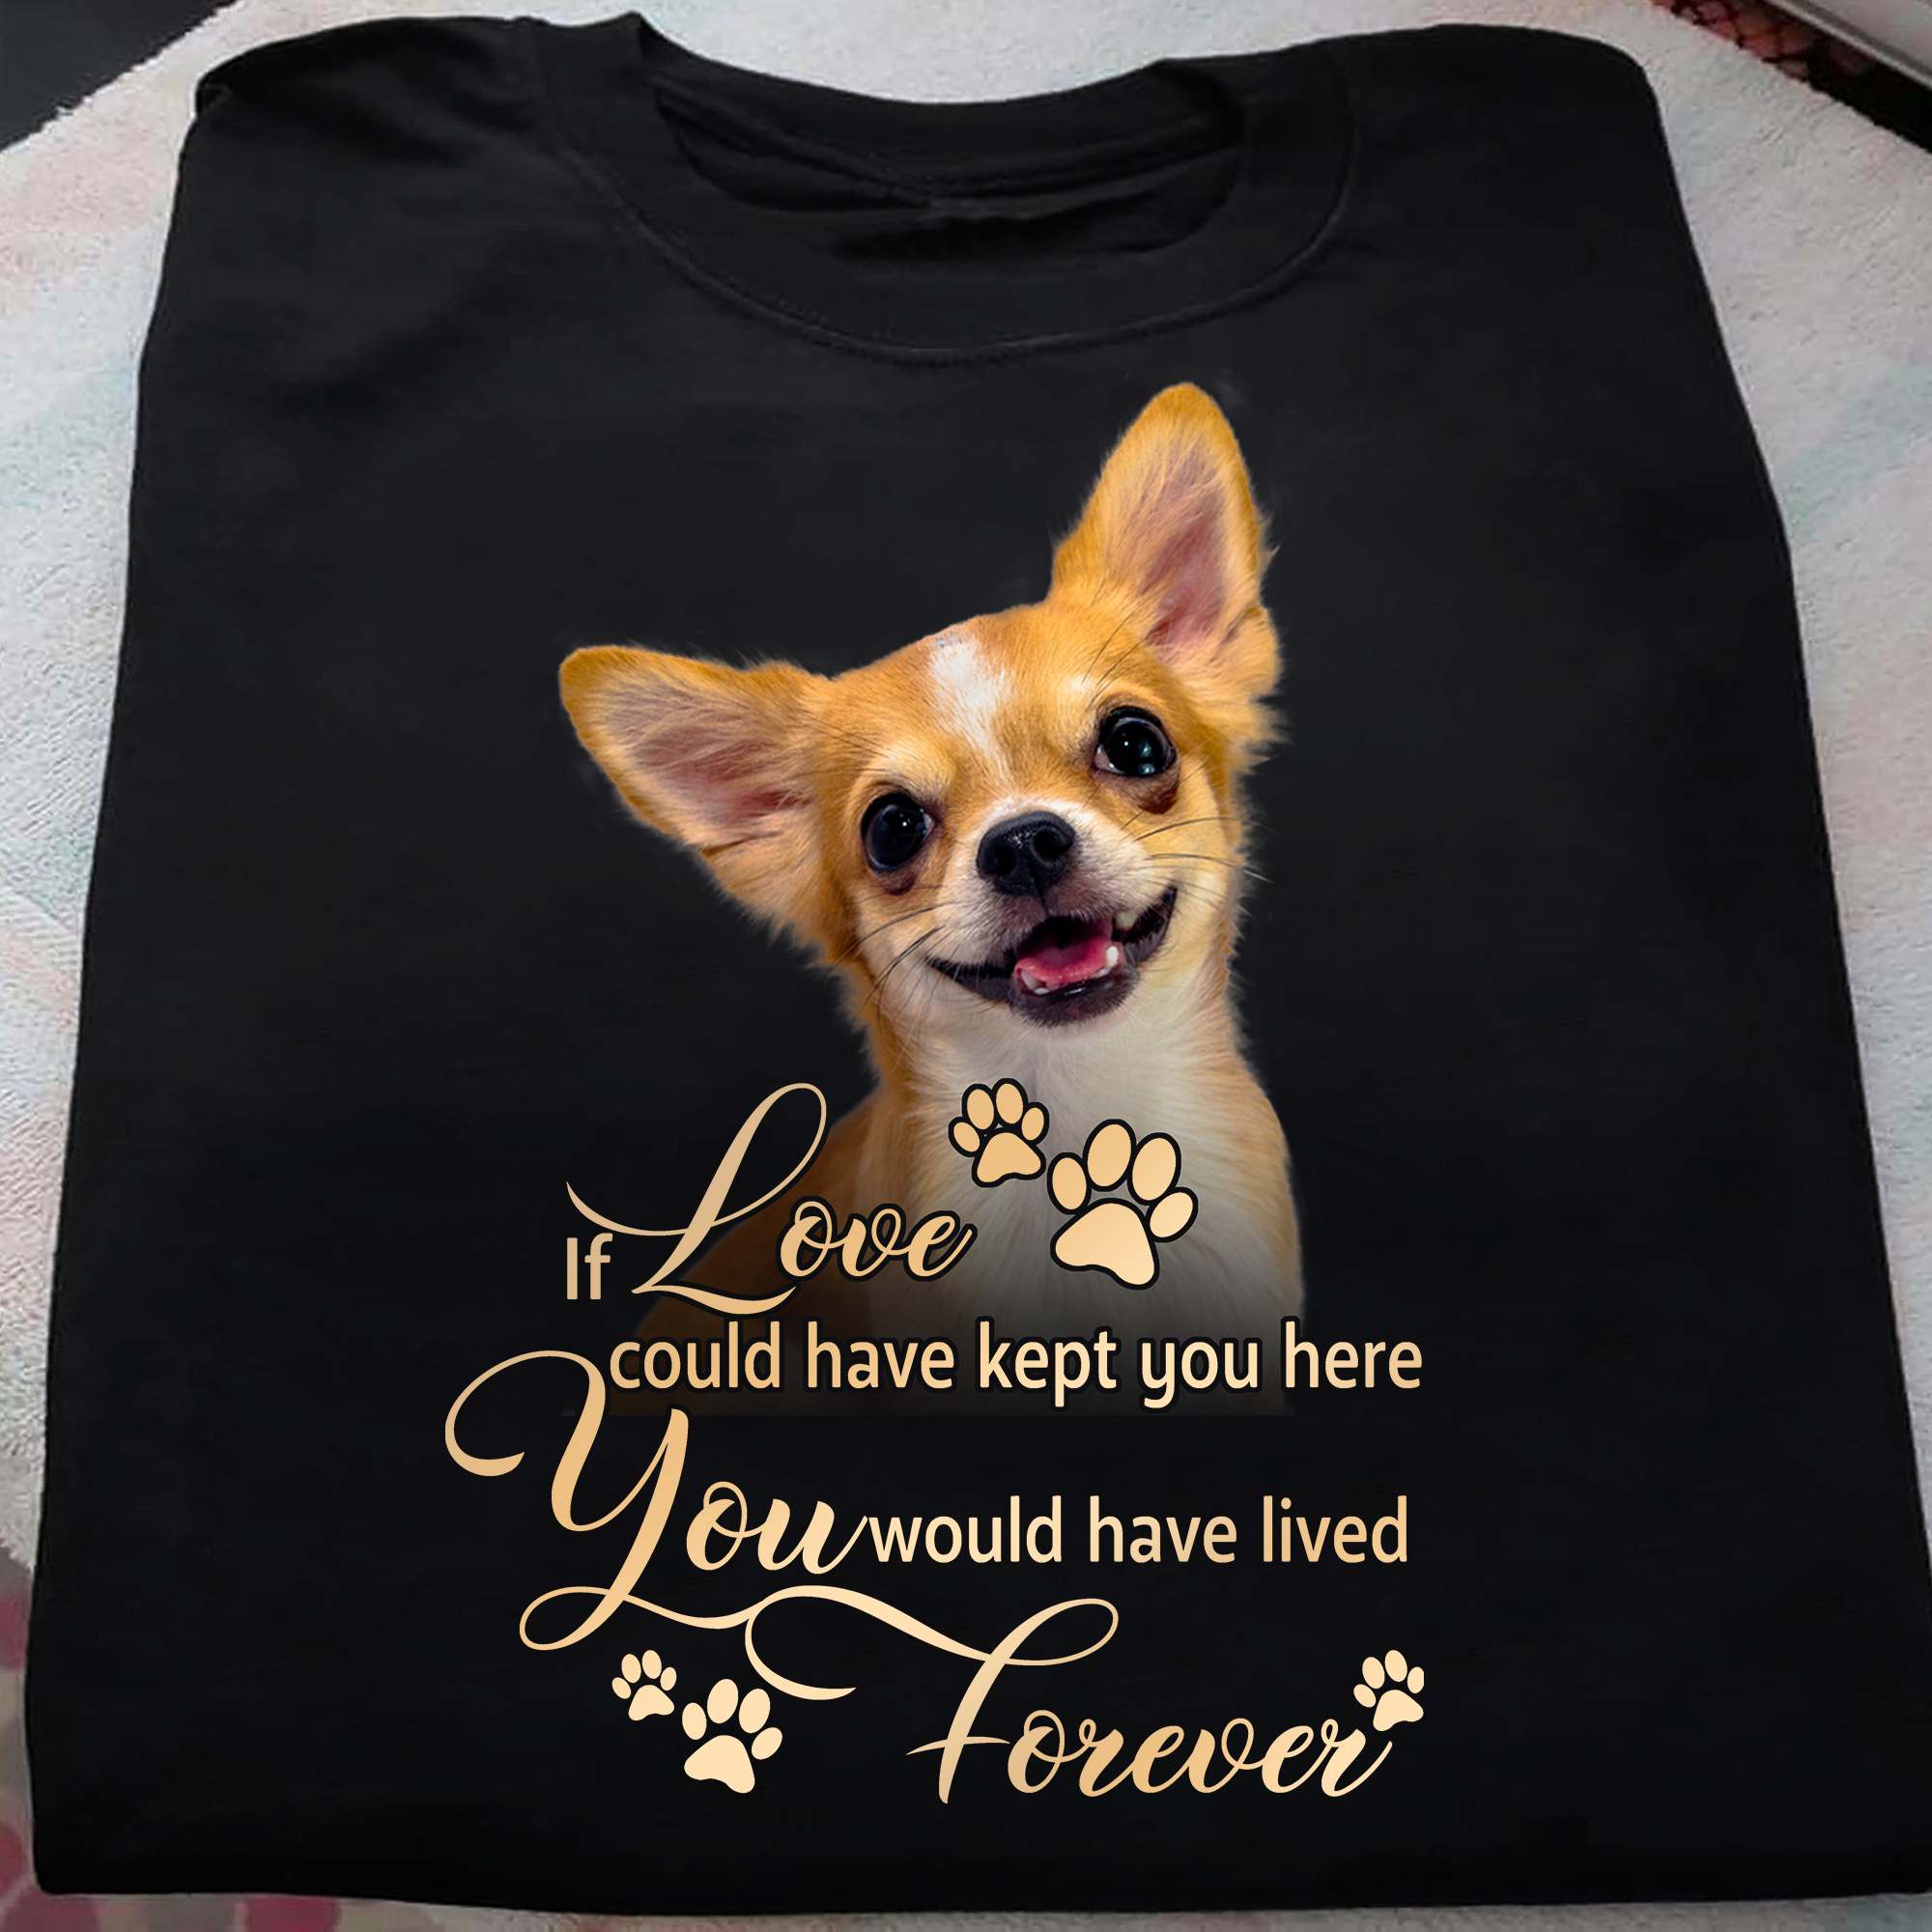 If love could have kept you here you would have lived forever - Chihuahua dog, dog lover